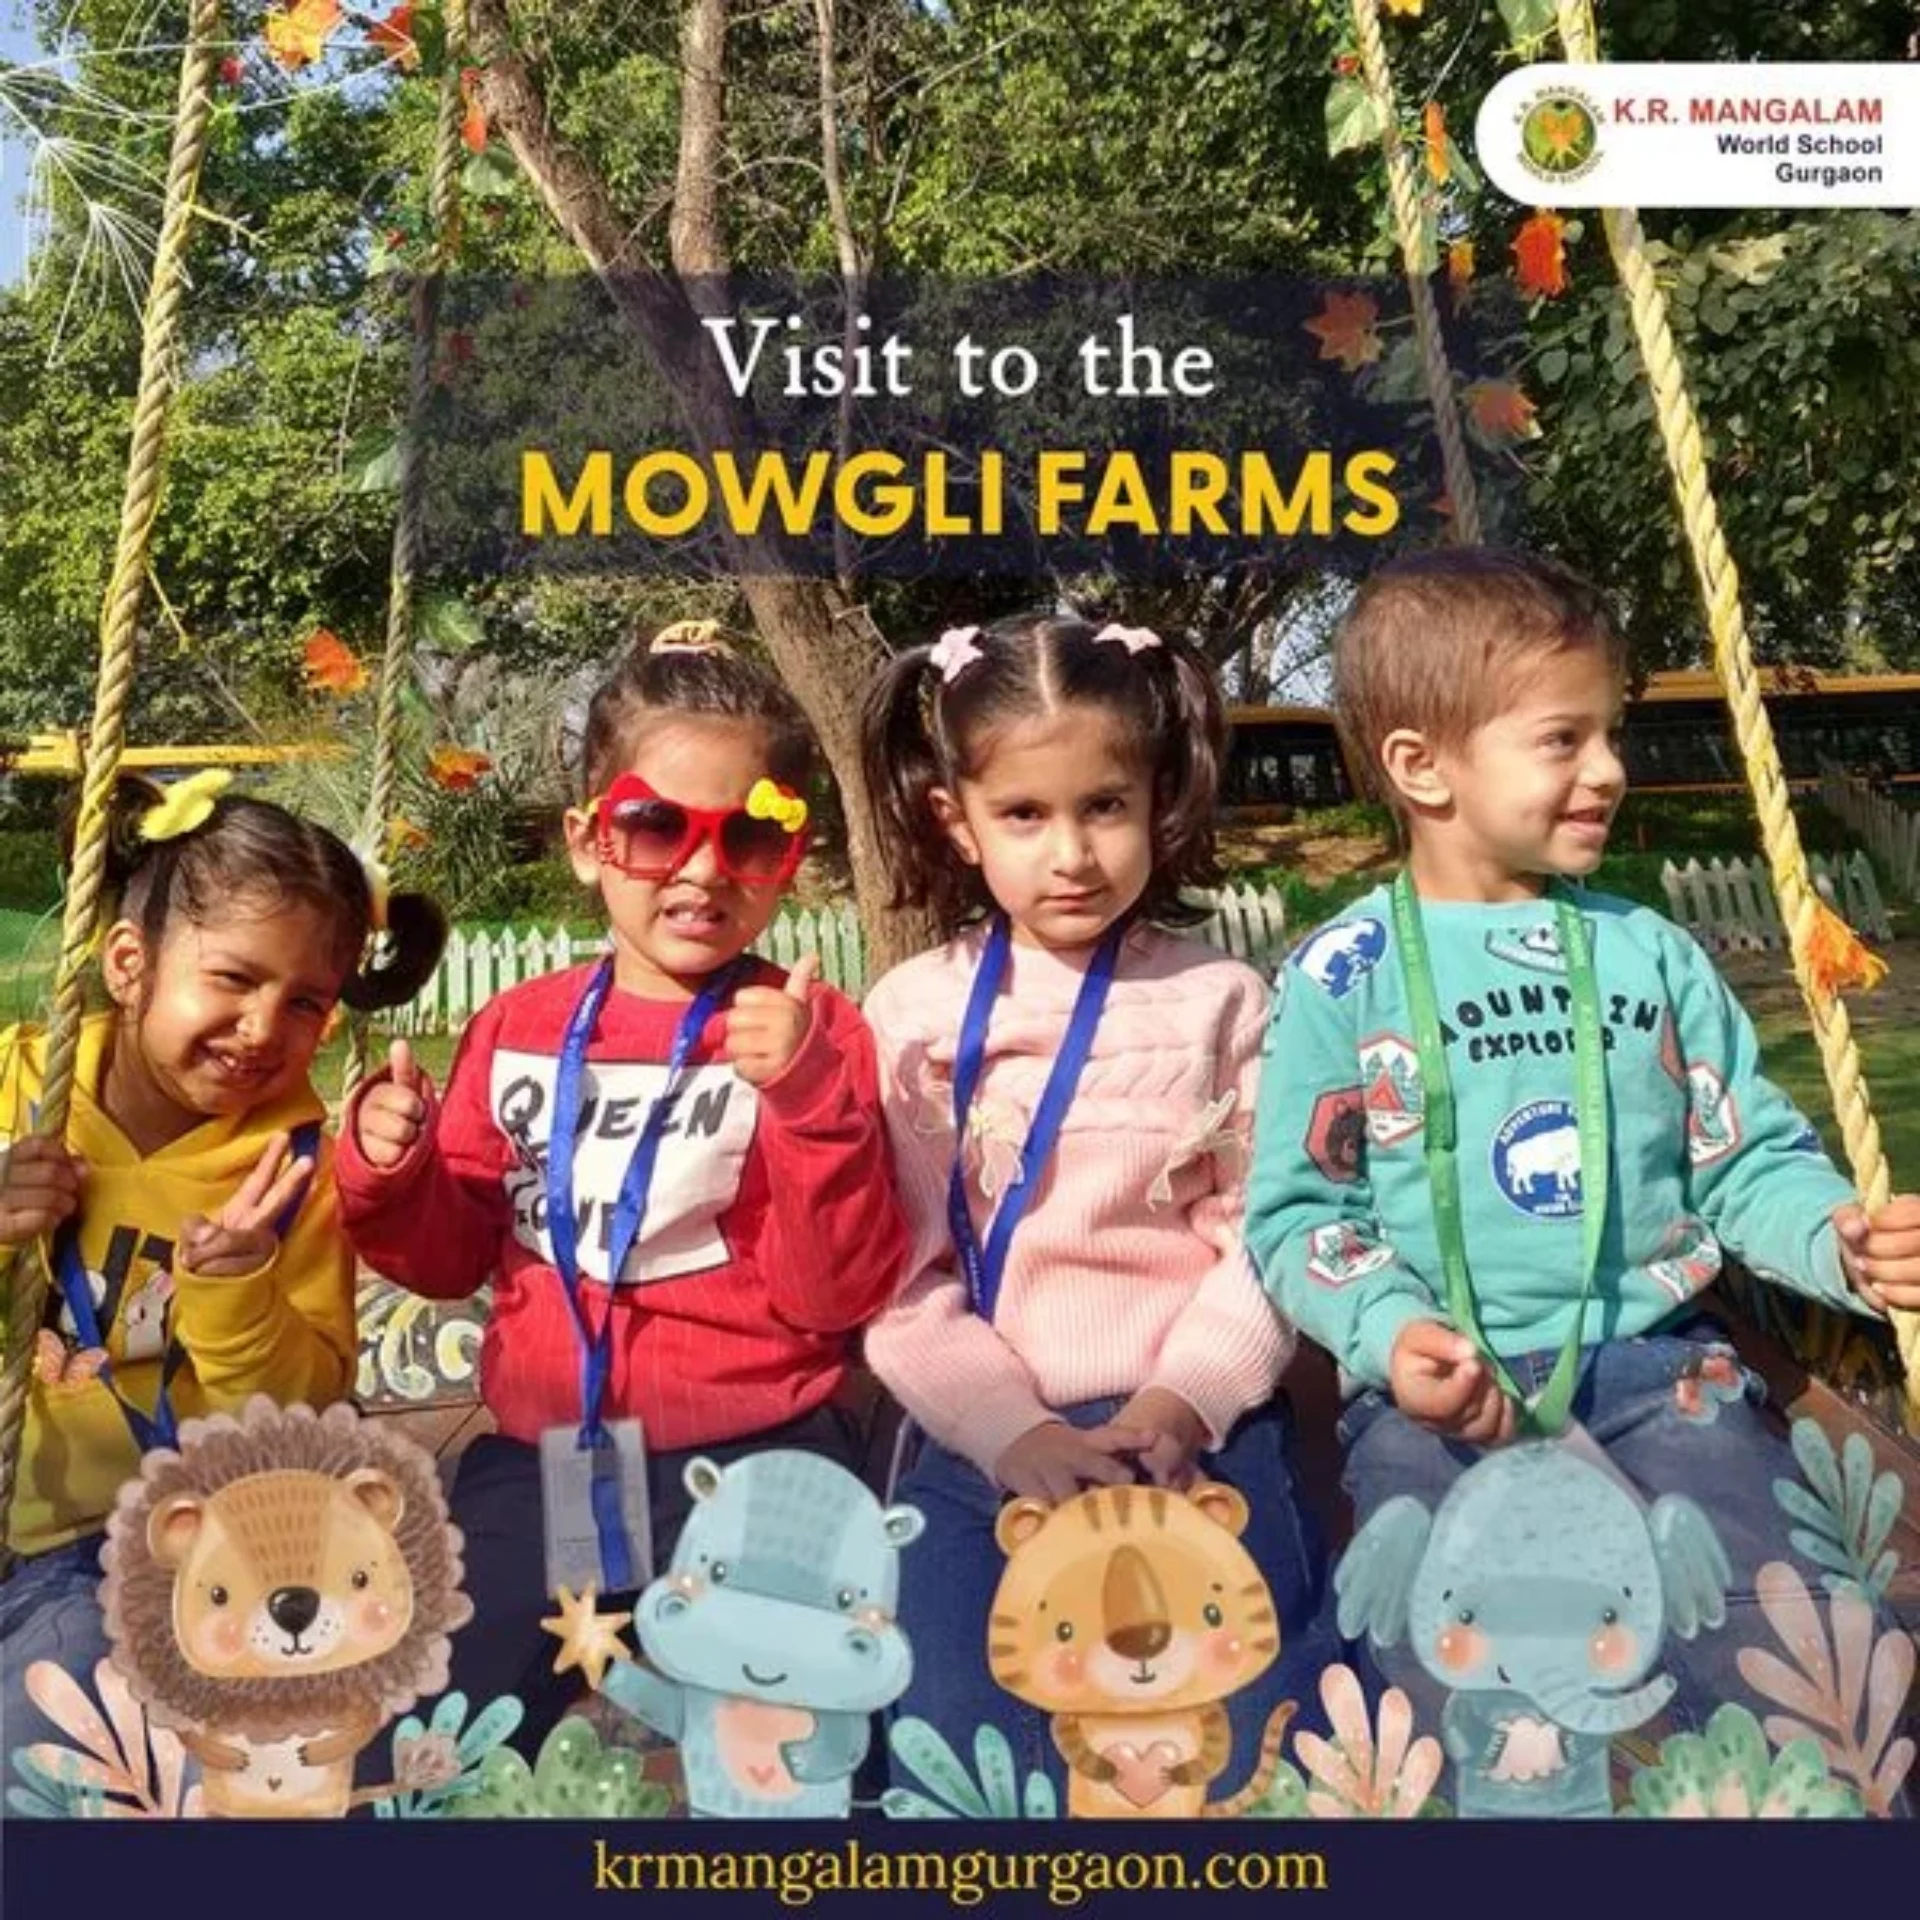 Students of the class Nursery visited the Mowgli farm Where they enjoyed